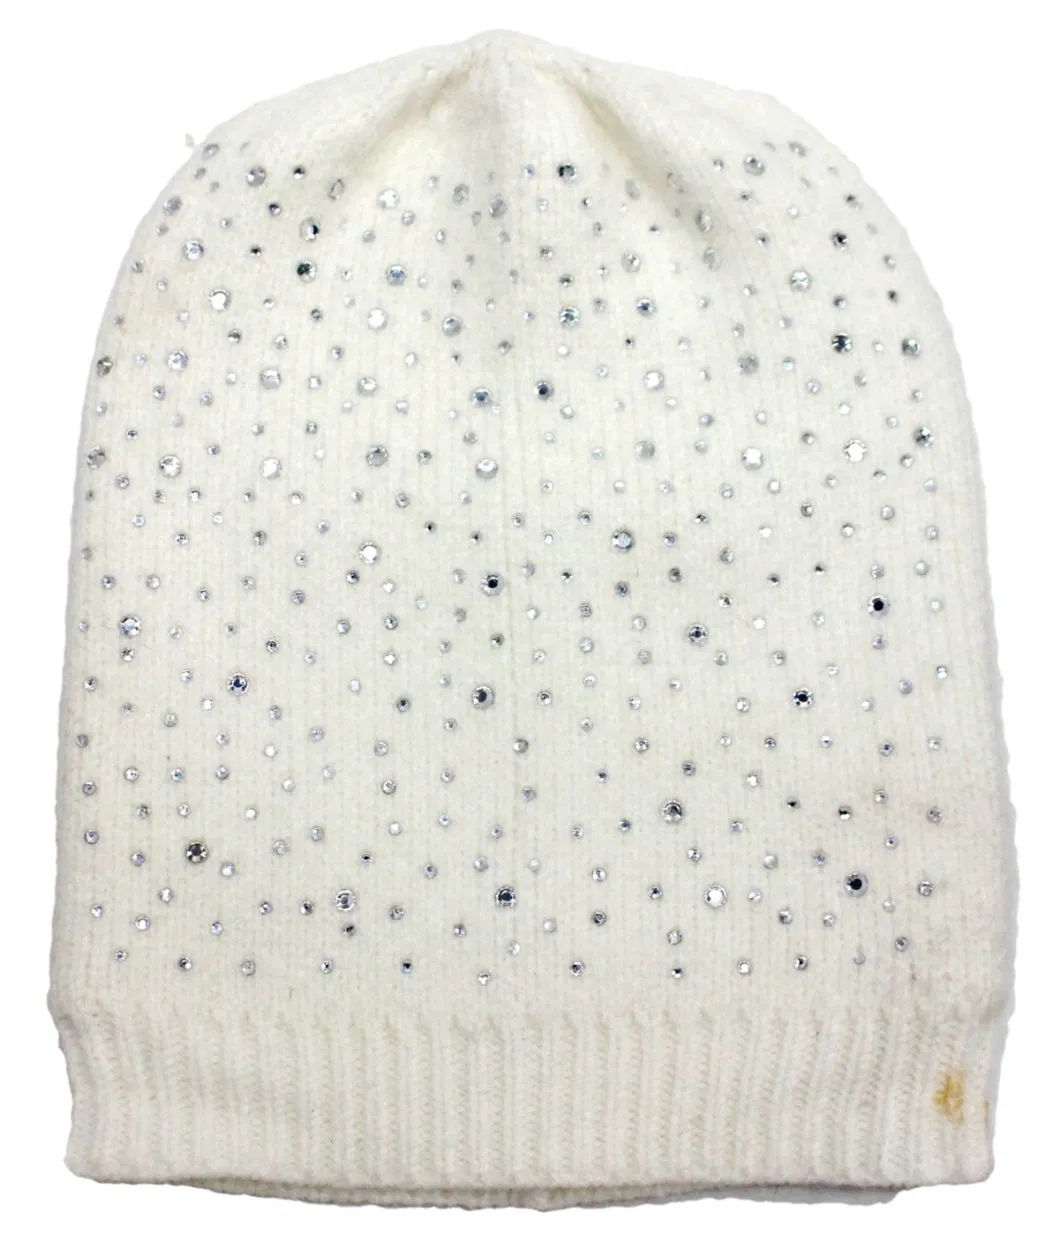 Winter 100% Acrylic Knitting Hat White Beige Color with Sparkling Stone Bling Bling Diamond 2022 Winter OEM